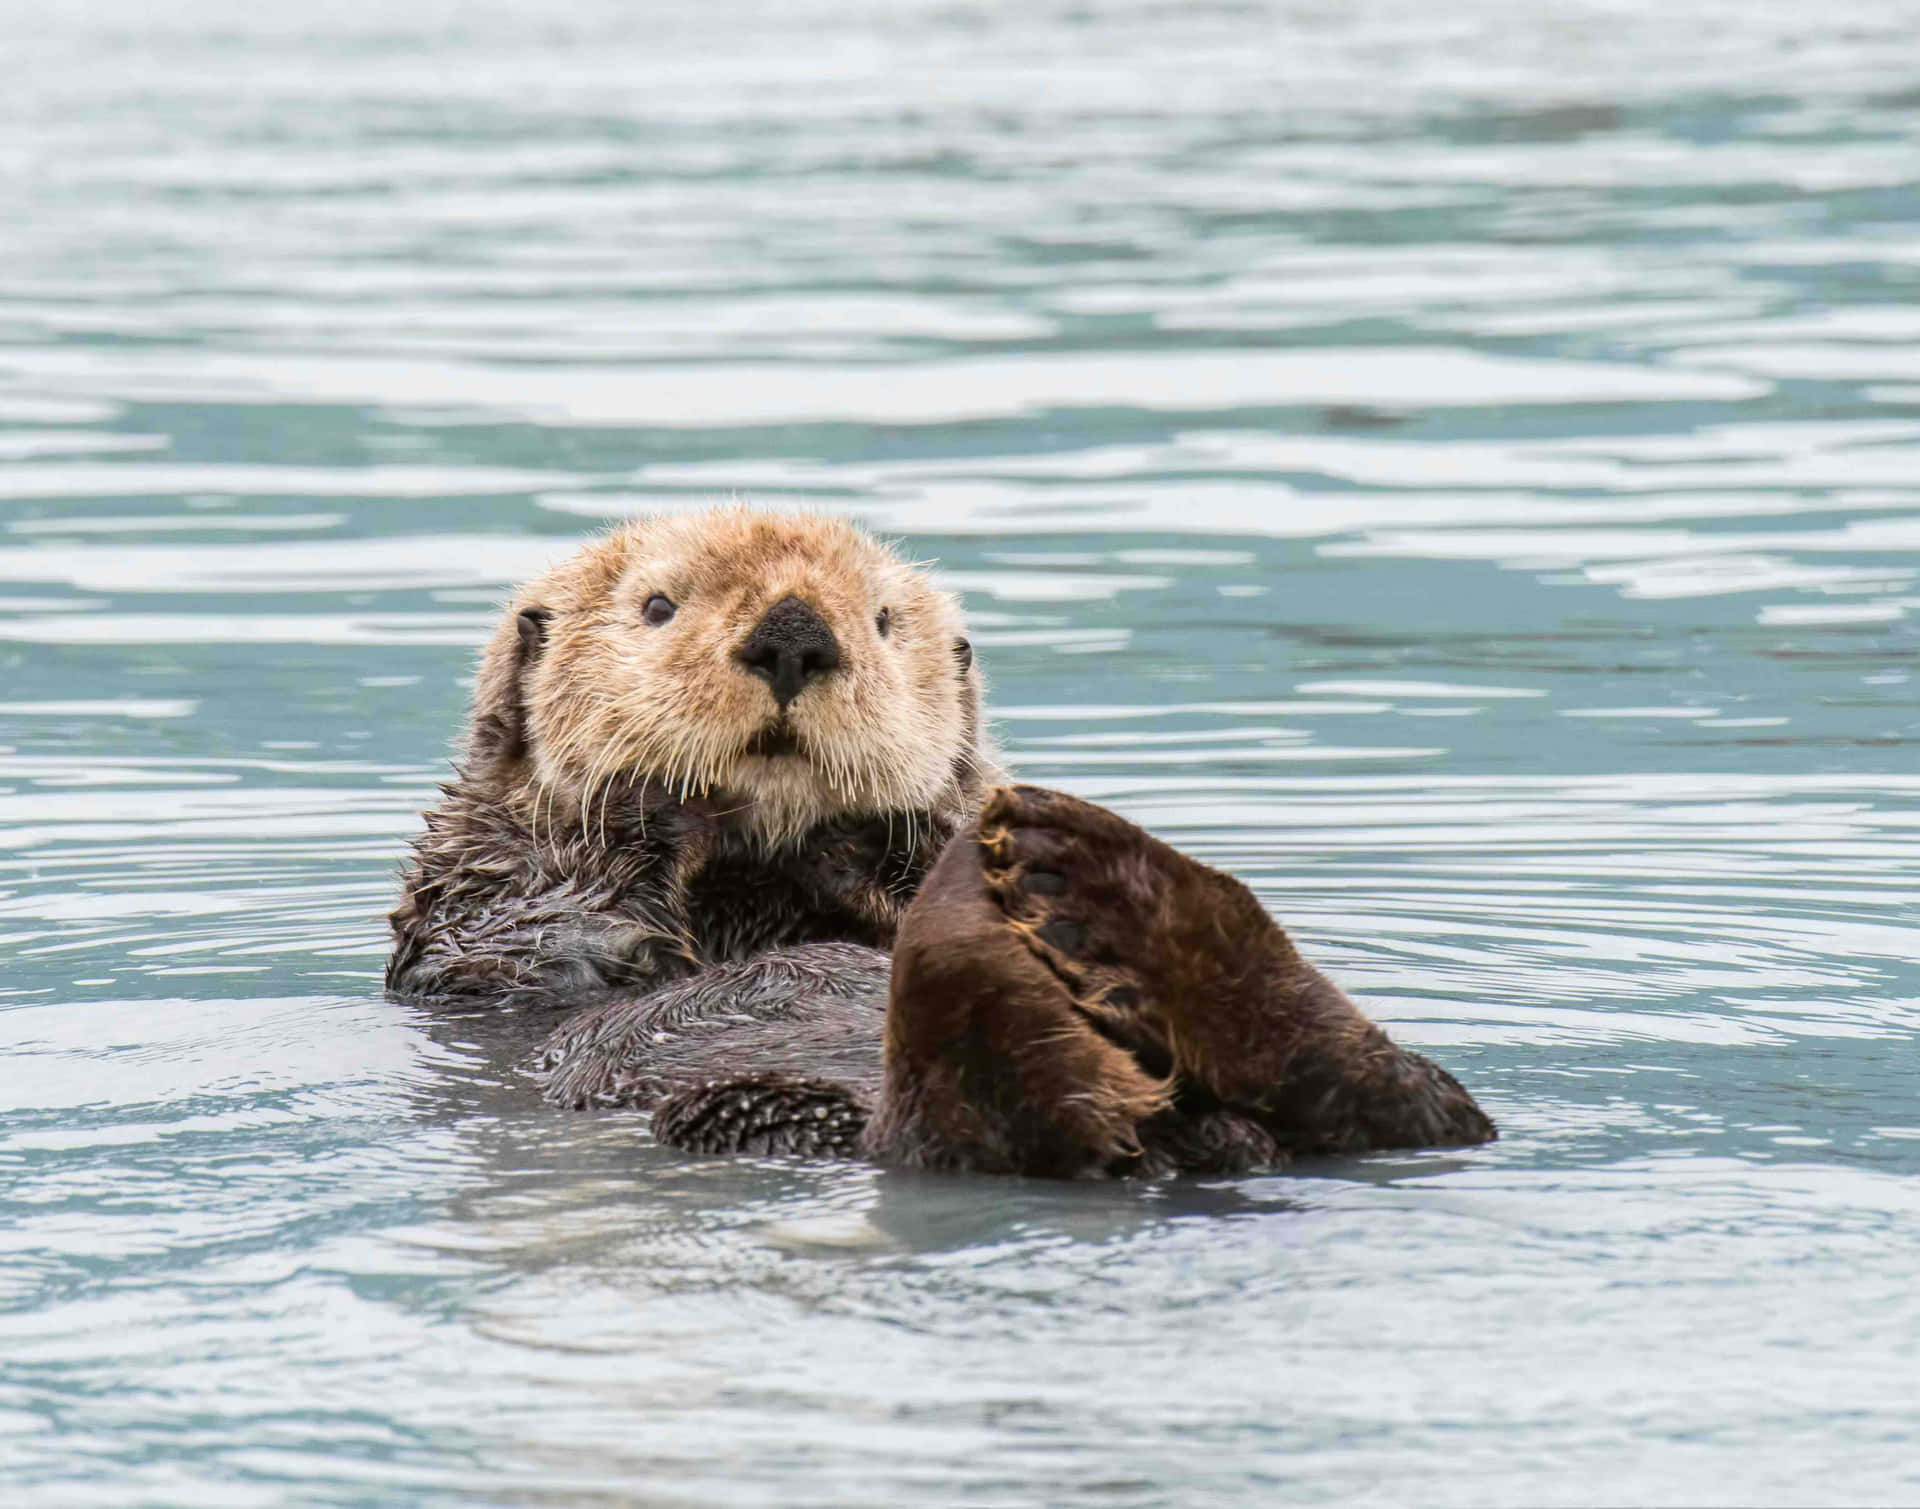 Sea Otter Floating Calm Waters.jpg Background